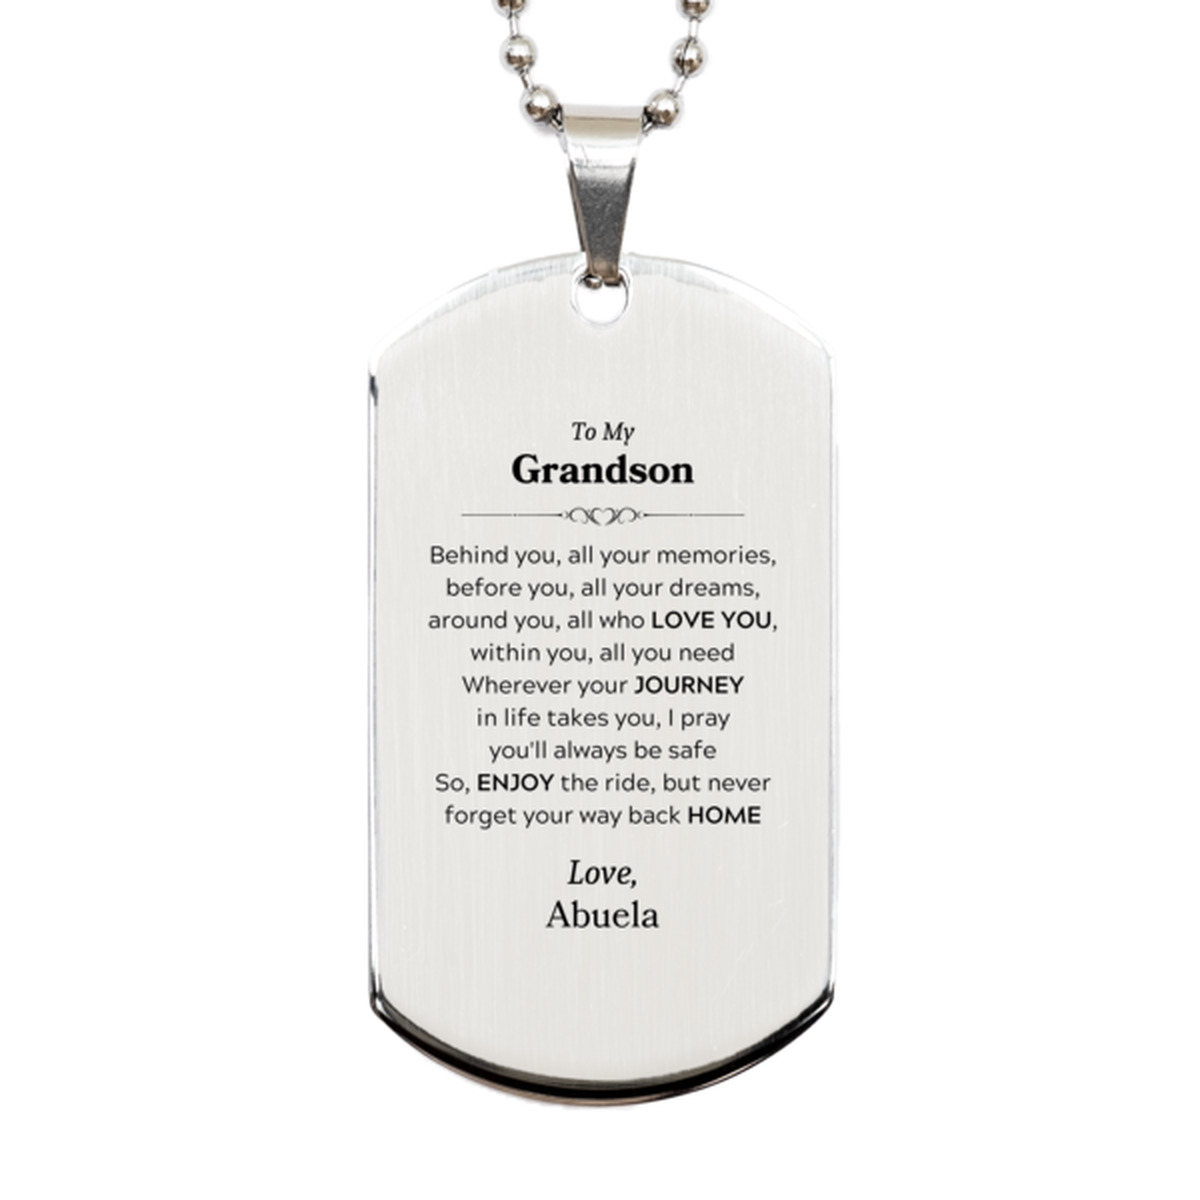 To My Grandson Graduation Gifts from Abuela, Grandson Silver Dog Tag Christmas Birthday Gifts for Grandson Behind you, all your memories, before you, all your dreams. Love, Abuela